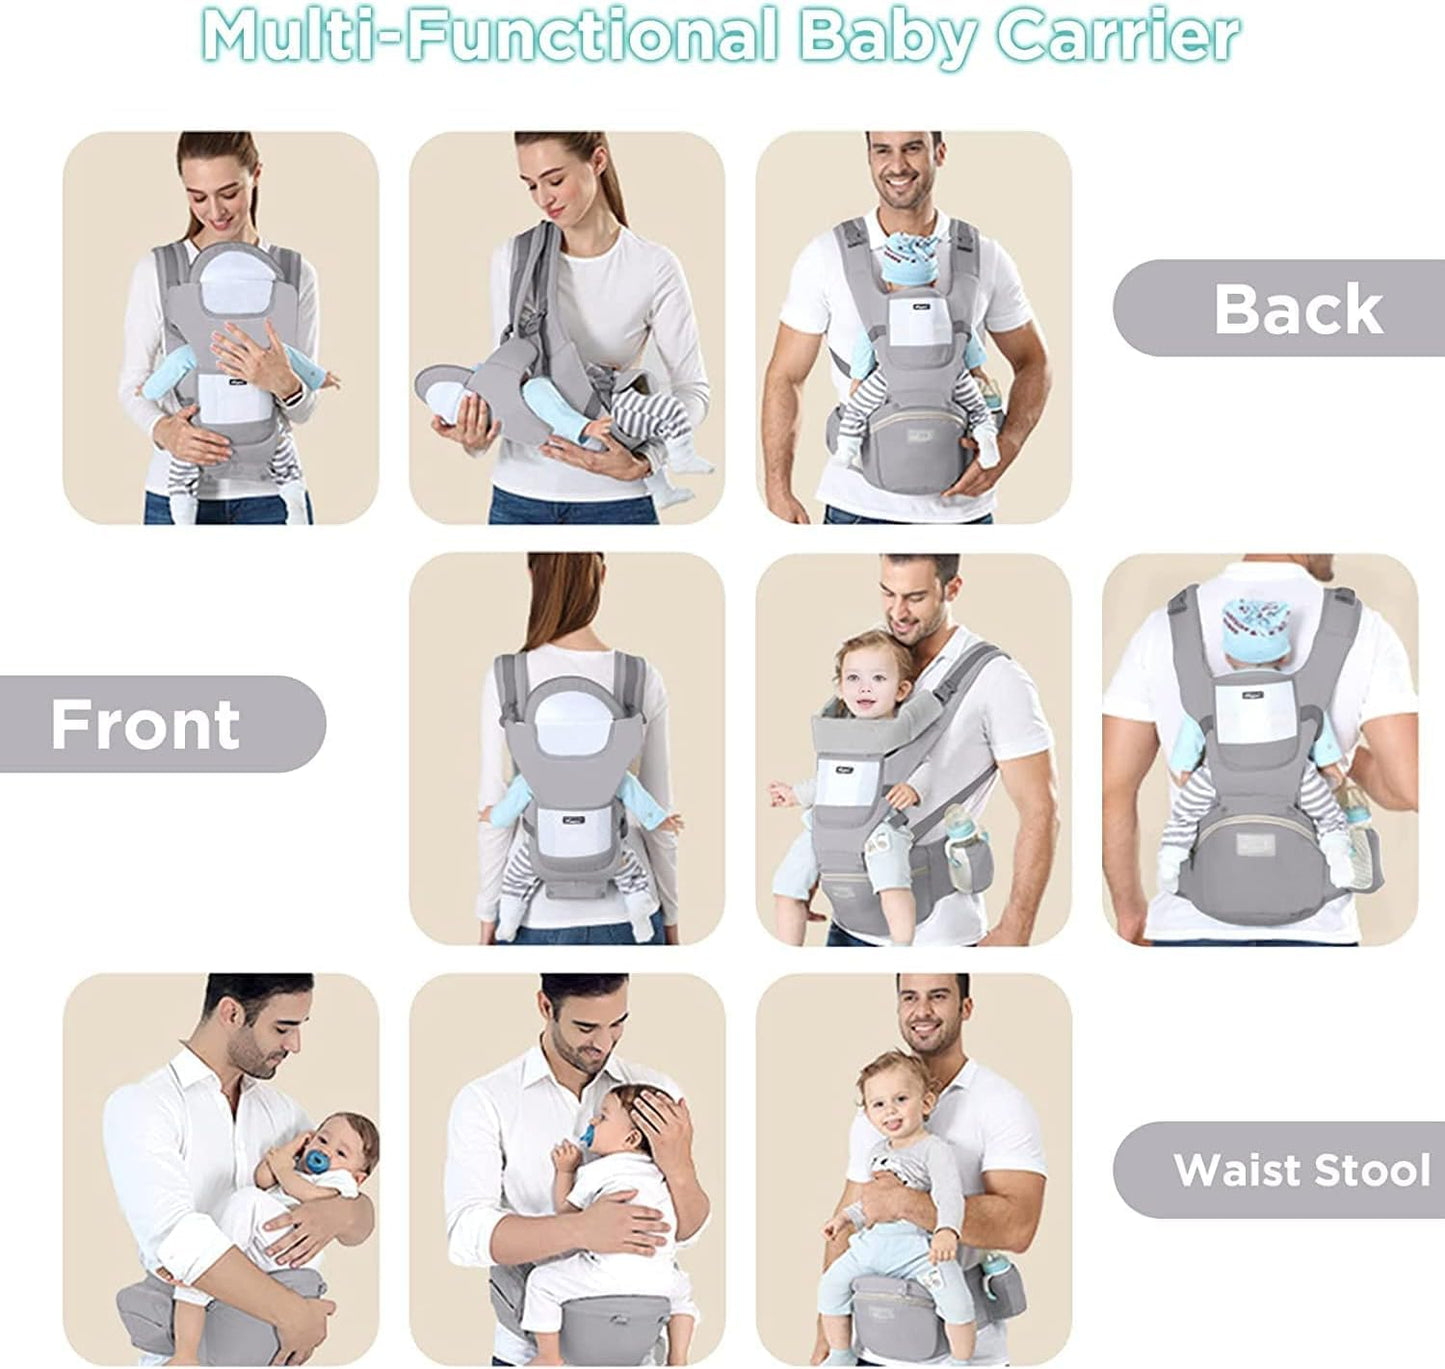 Deal Hunt 6 in 1 Baby Carrier Hip Seat, Multifunctional Baby Strap Waist Carrier for walking, Shopping, Trip, Hiking - Adjustable Size & Suitable for 0-36 Months Baby with Gift Box Packaging (Grey)